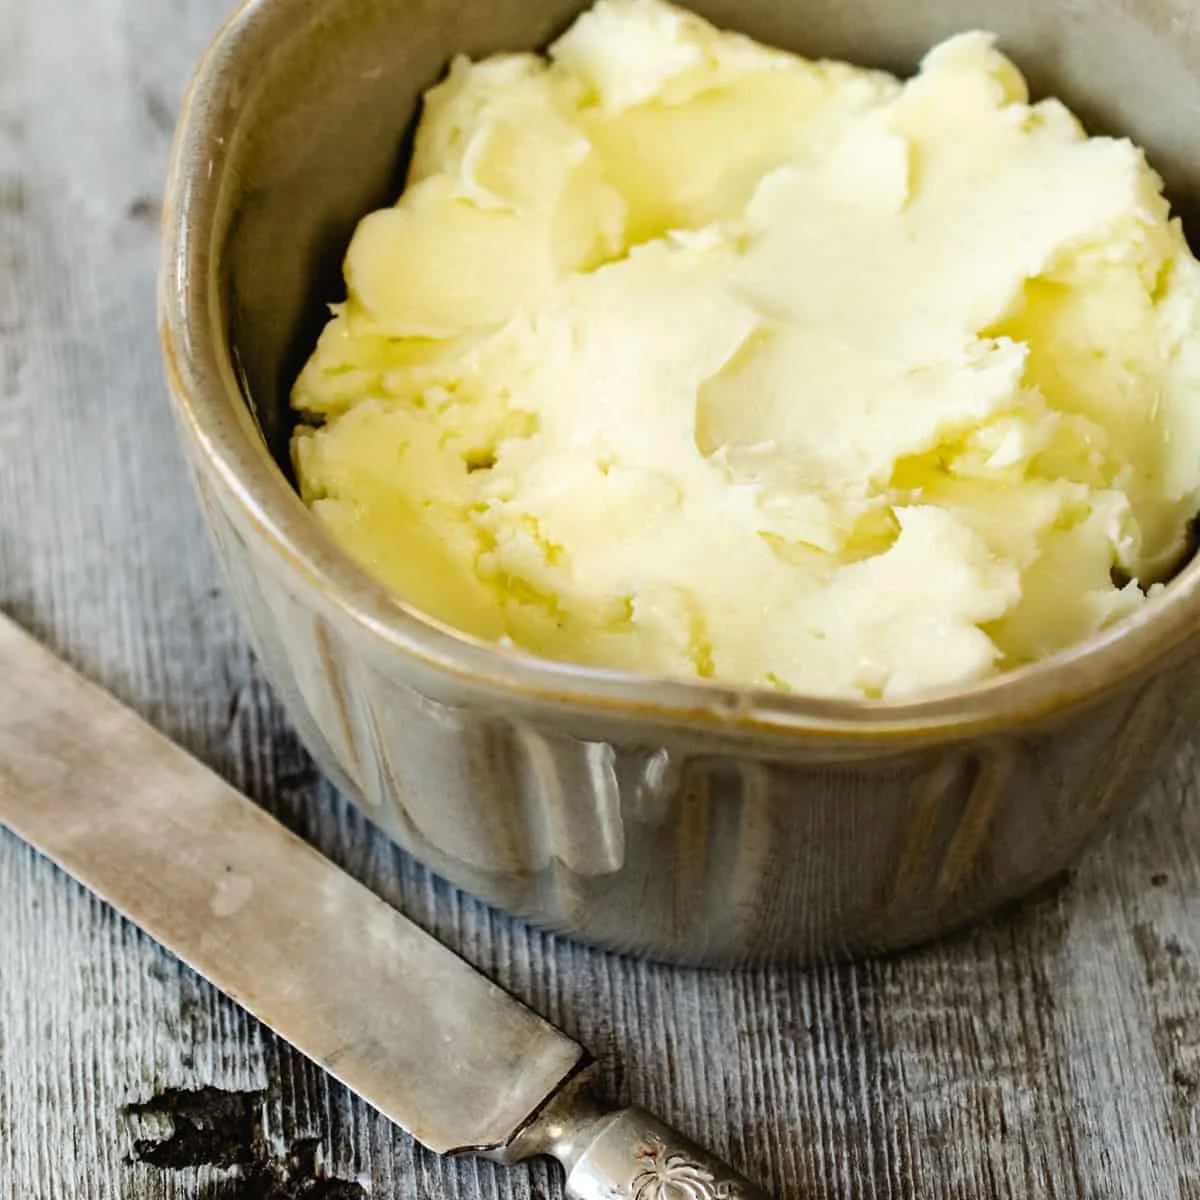 Homemade Butter, How to Make Your Own Butter